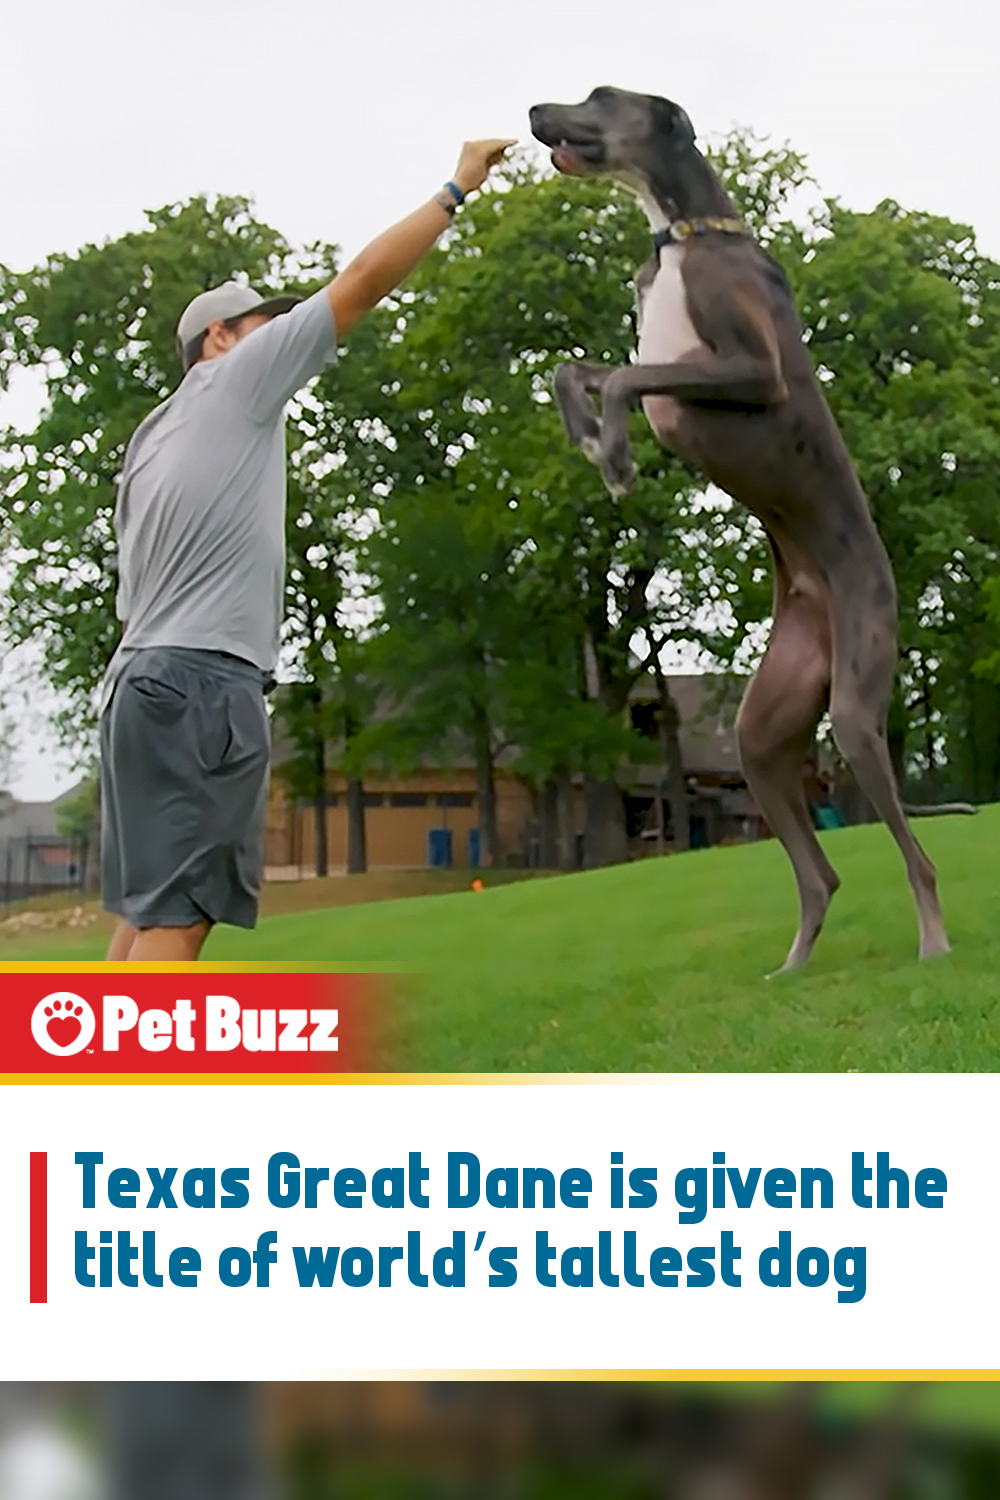 Texas Great Dane is given the title of world’s tallest dog